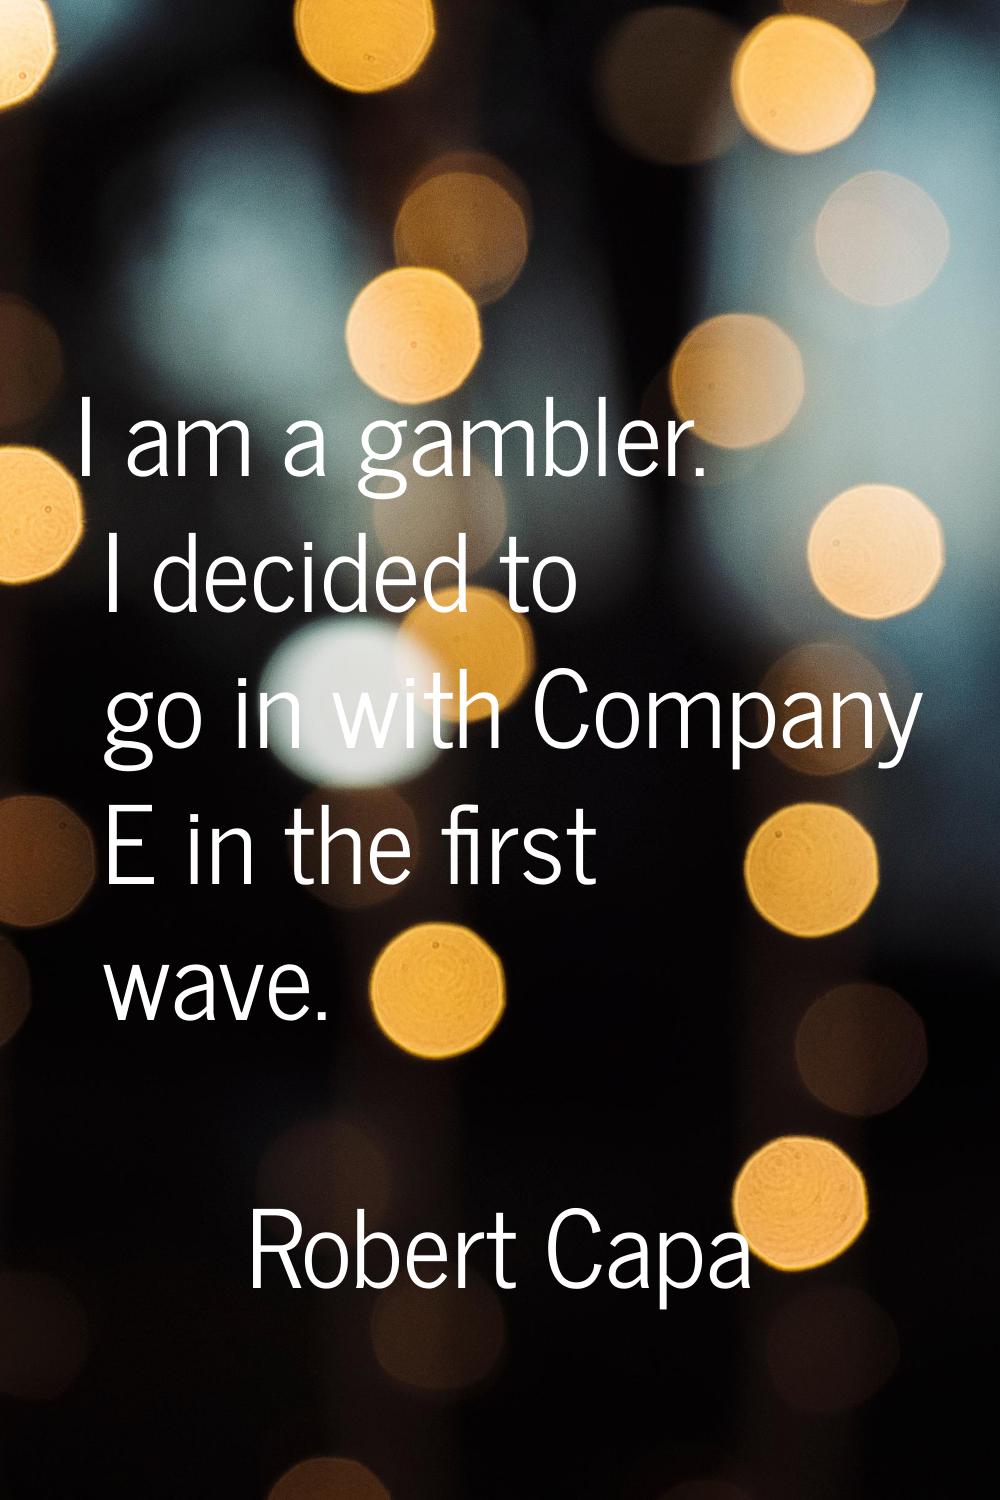 I am a gambler. I decided to go in with Company E in the first wave.